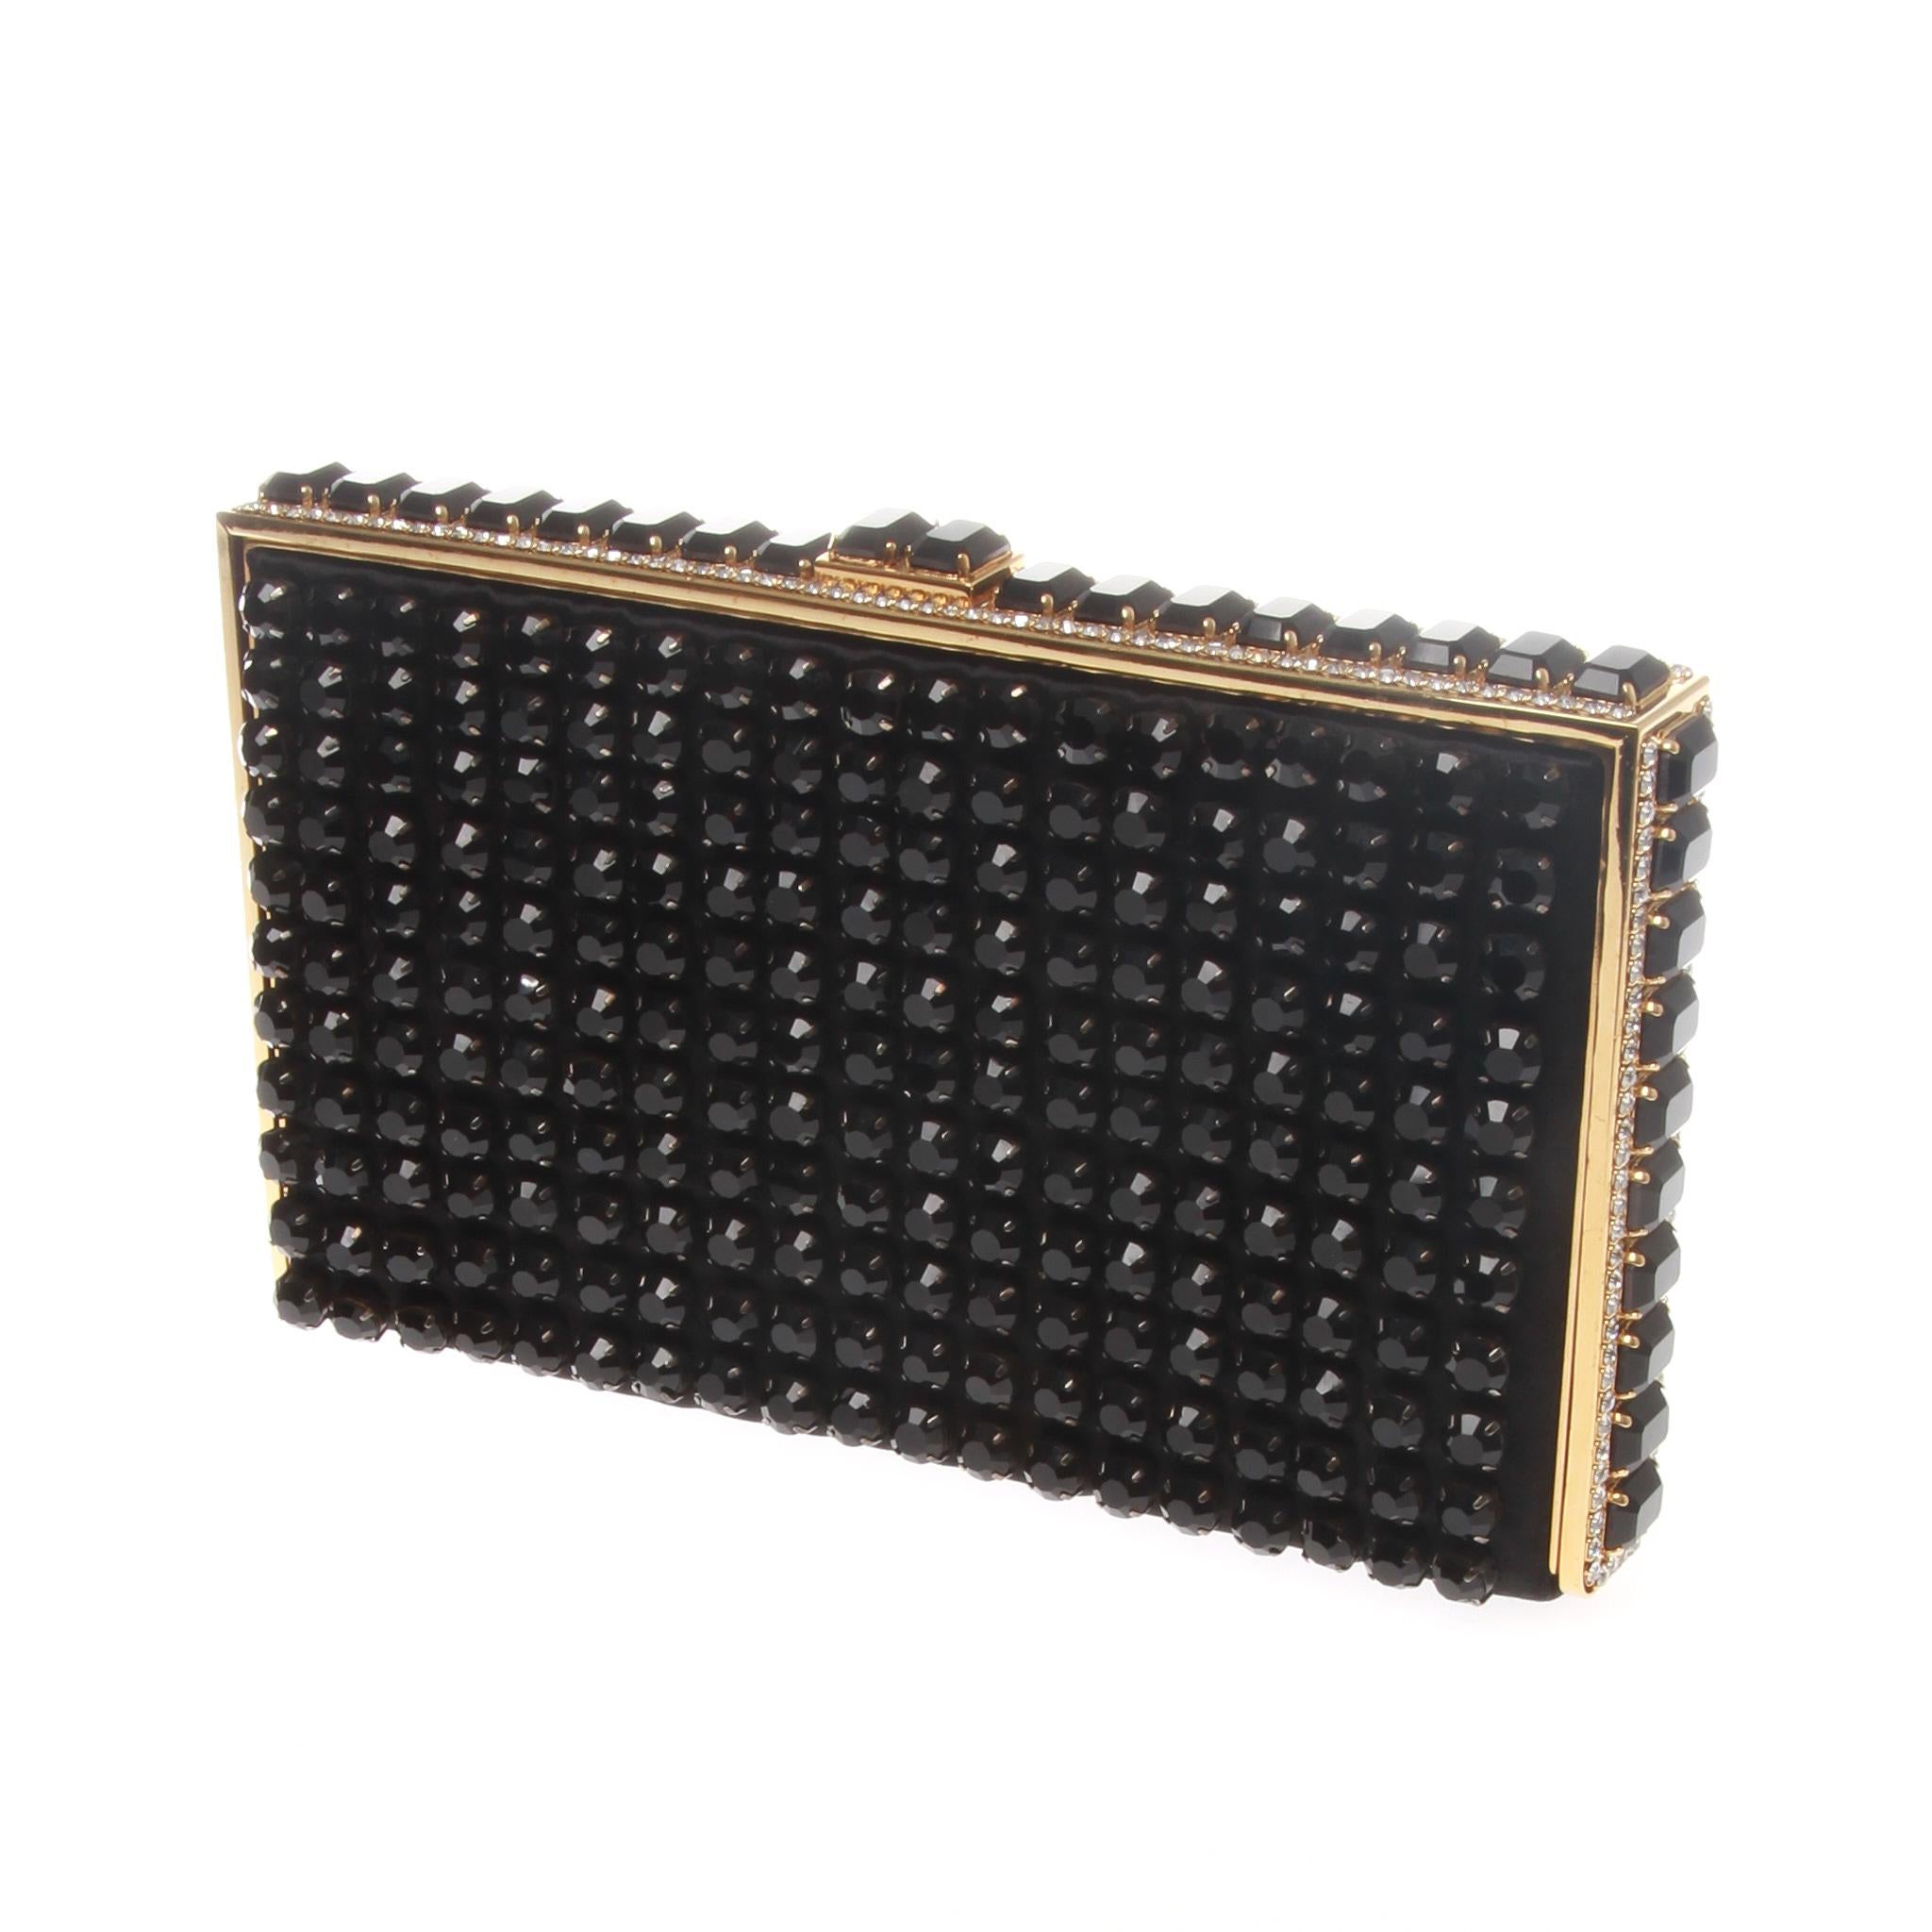 Valentino Garavani Black Beaded Crystal Evening Handbag Clutch
With this Stunning Valentino Garavani Evening Clutch on your hand you’ll be the belle of both ball and boardroom for its symphony of crystals glamour.
The glamorous and studded with